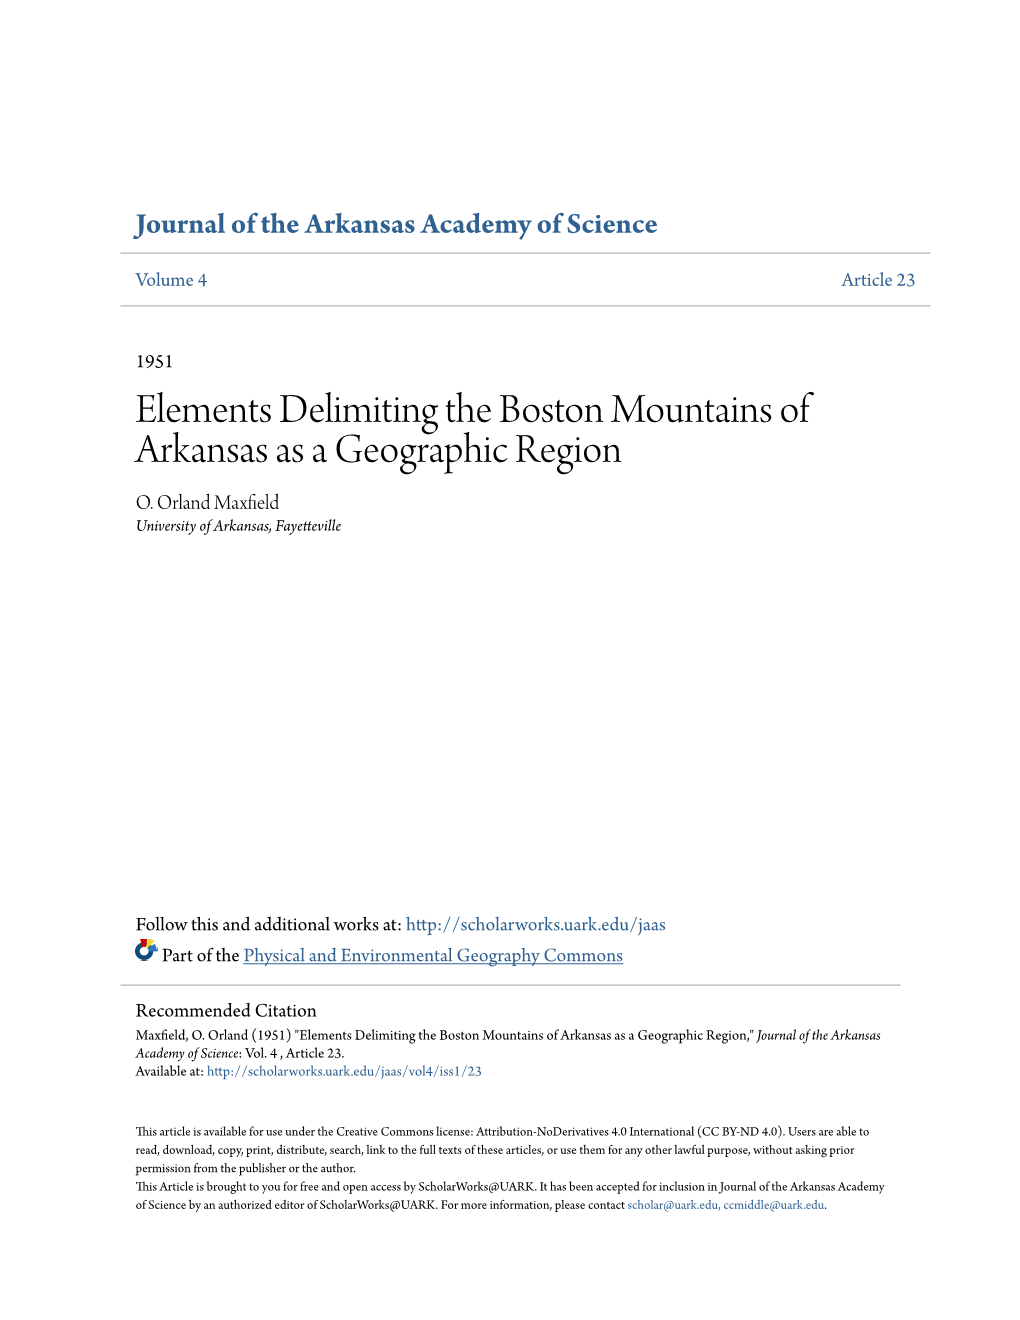 Elements Delimiting the Boston Mountains of Arkansas As a Geographic Region O